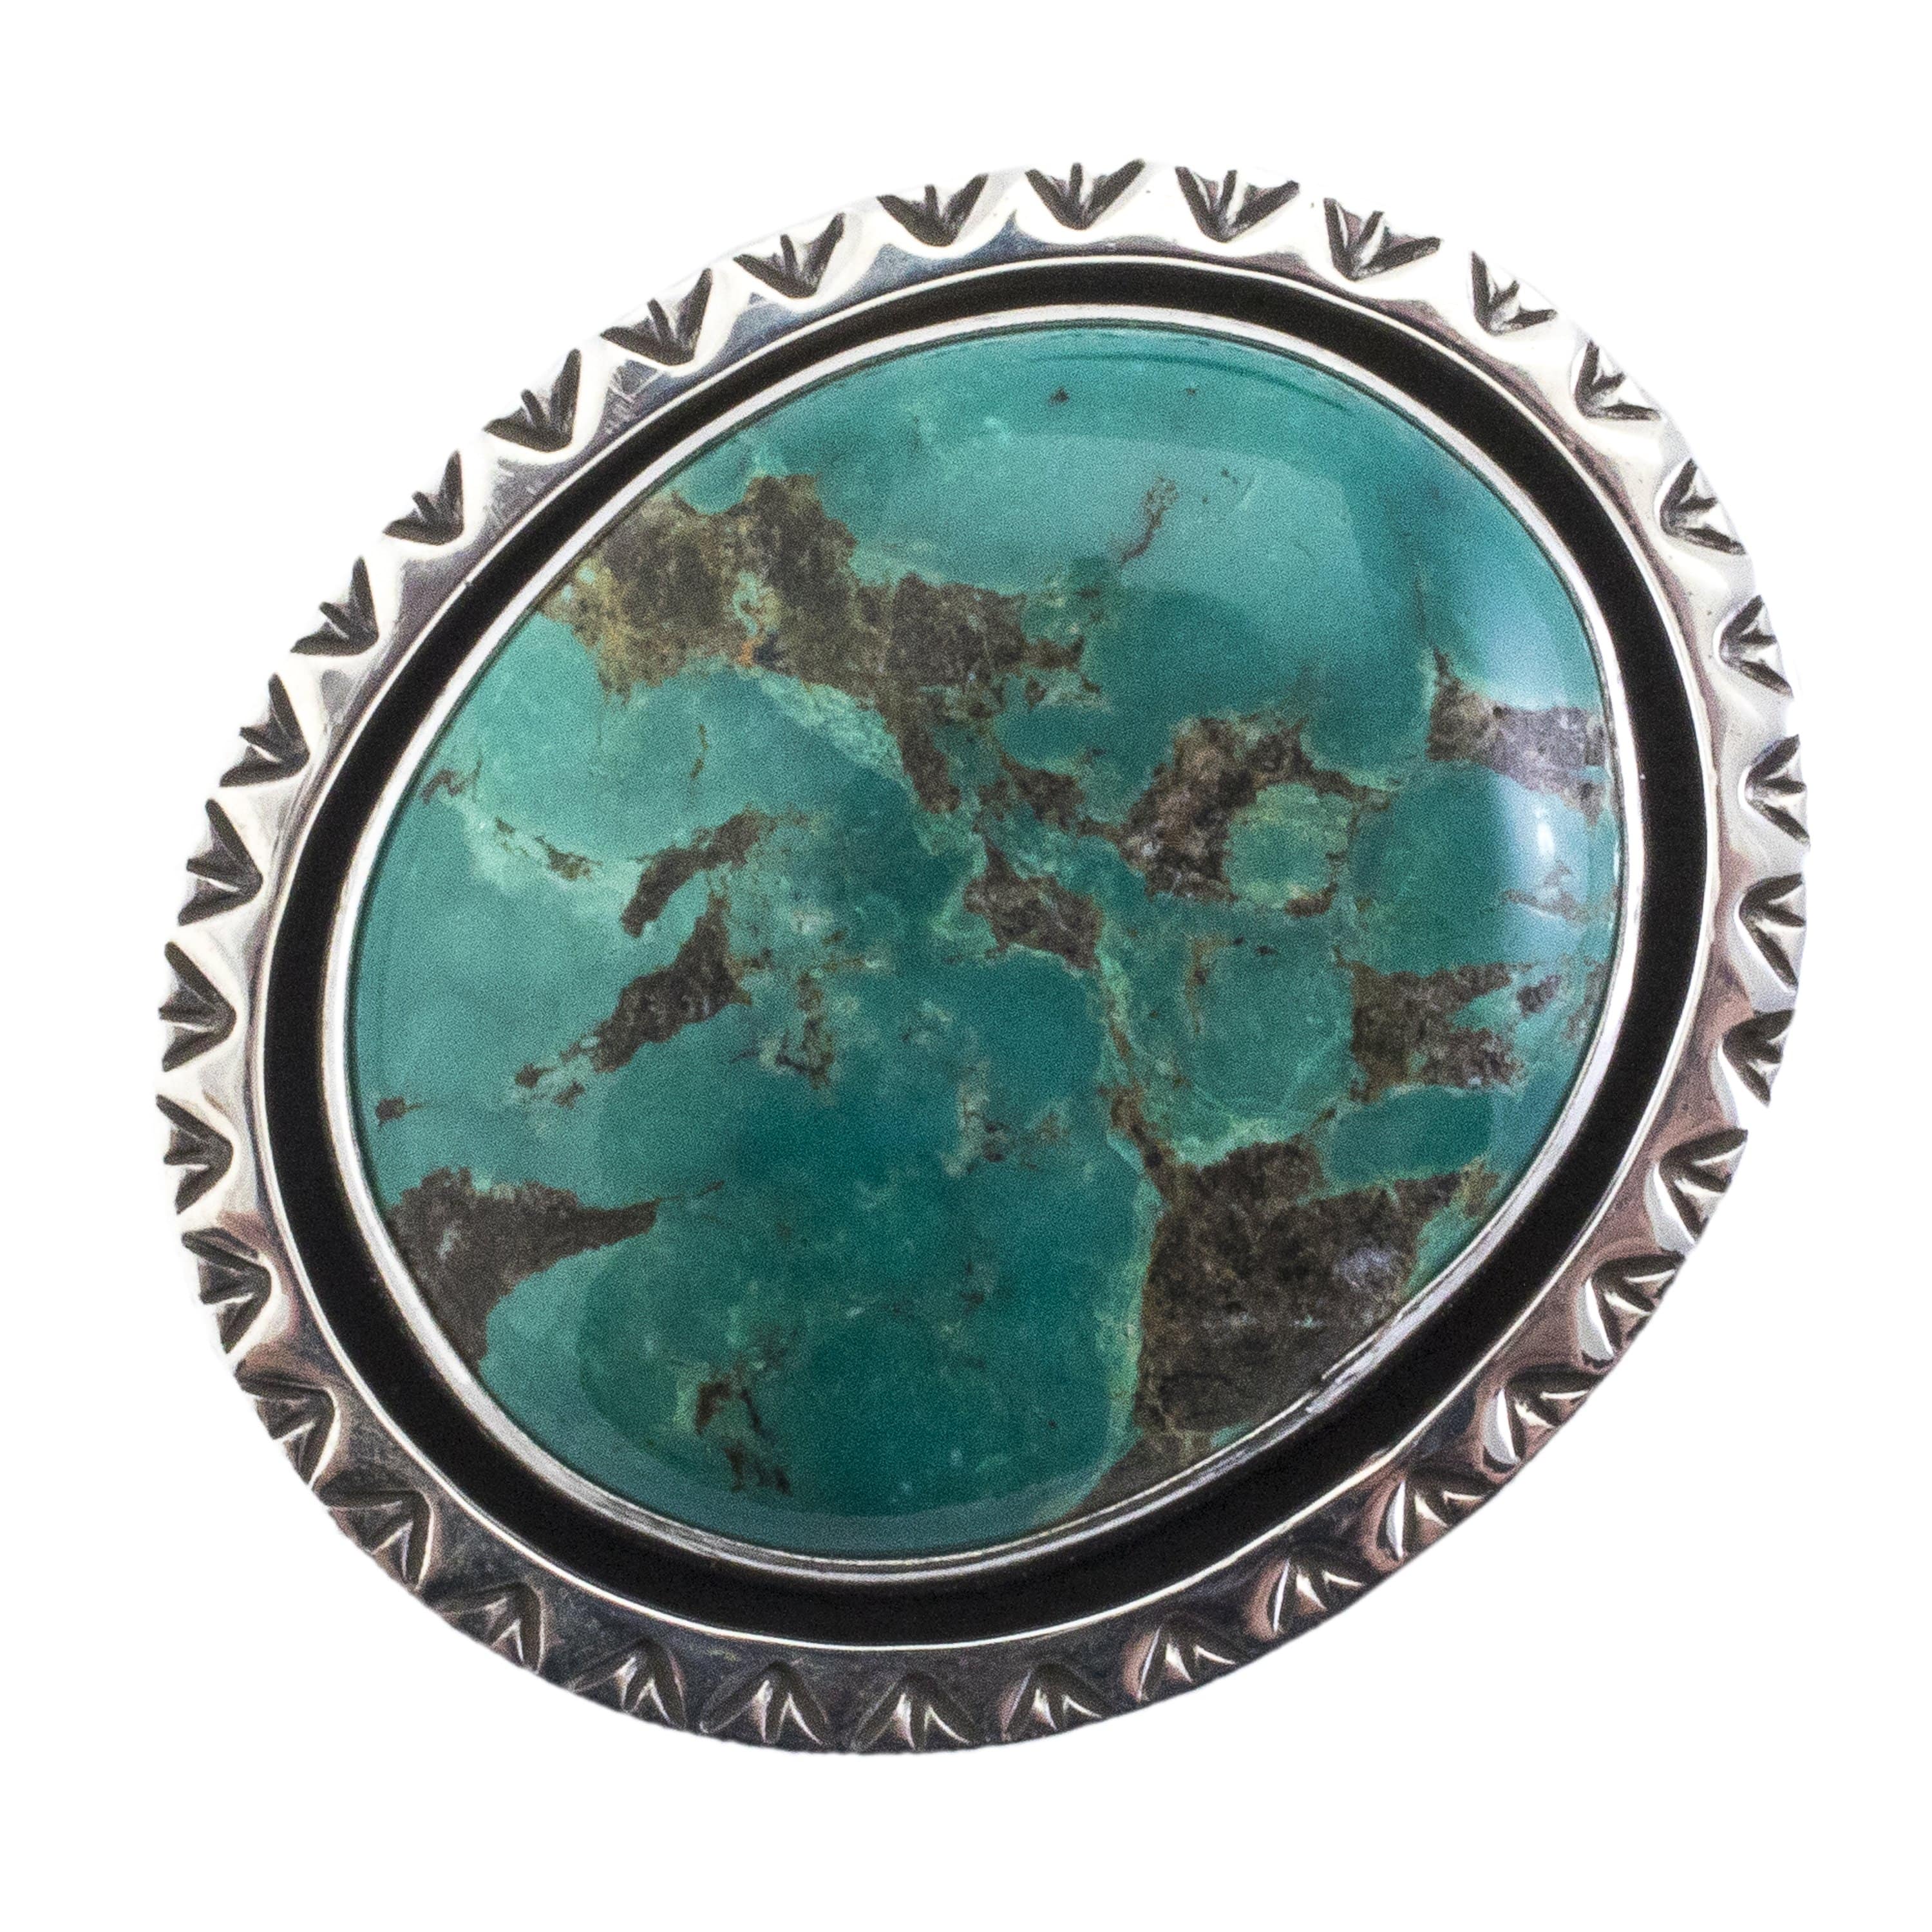 Kalifano Native American Jewelry 7.5 Fox Turquoise USA Native American Made 925 Sterling Silver Ring NAR800.011.75